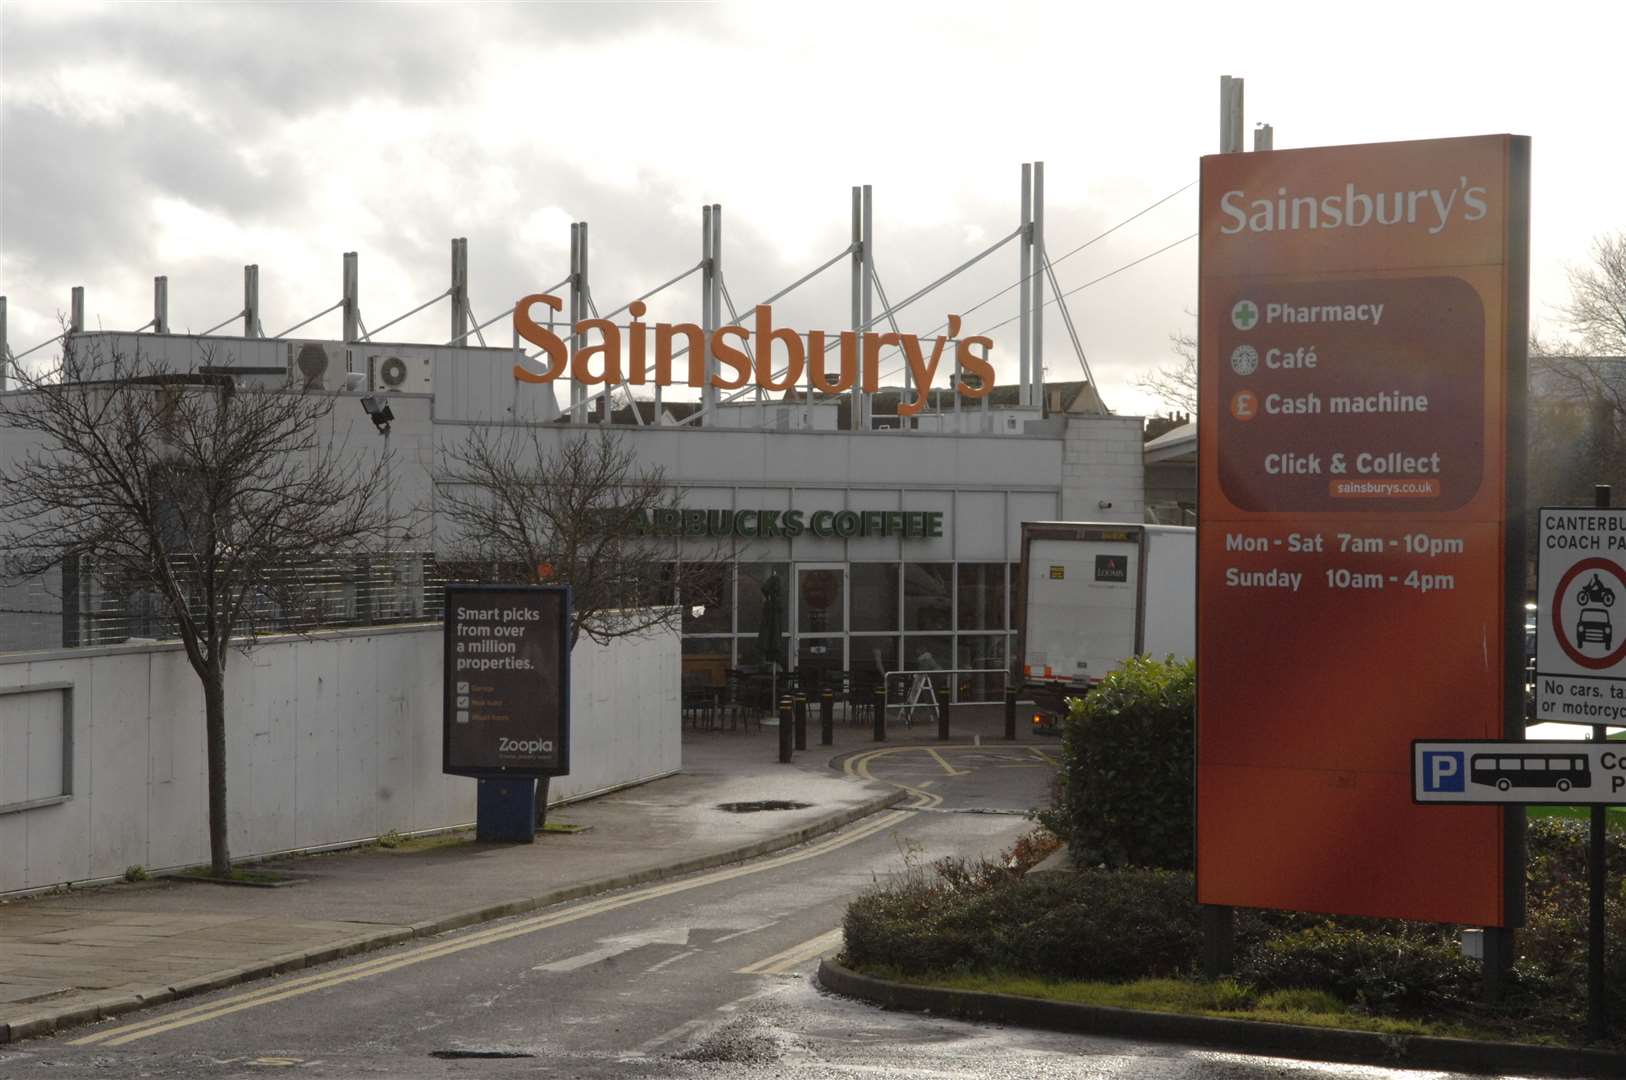 The incident took place in a Sainsbury's car park